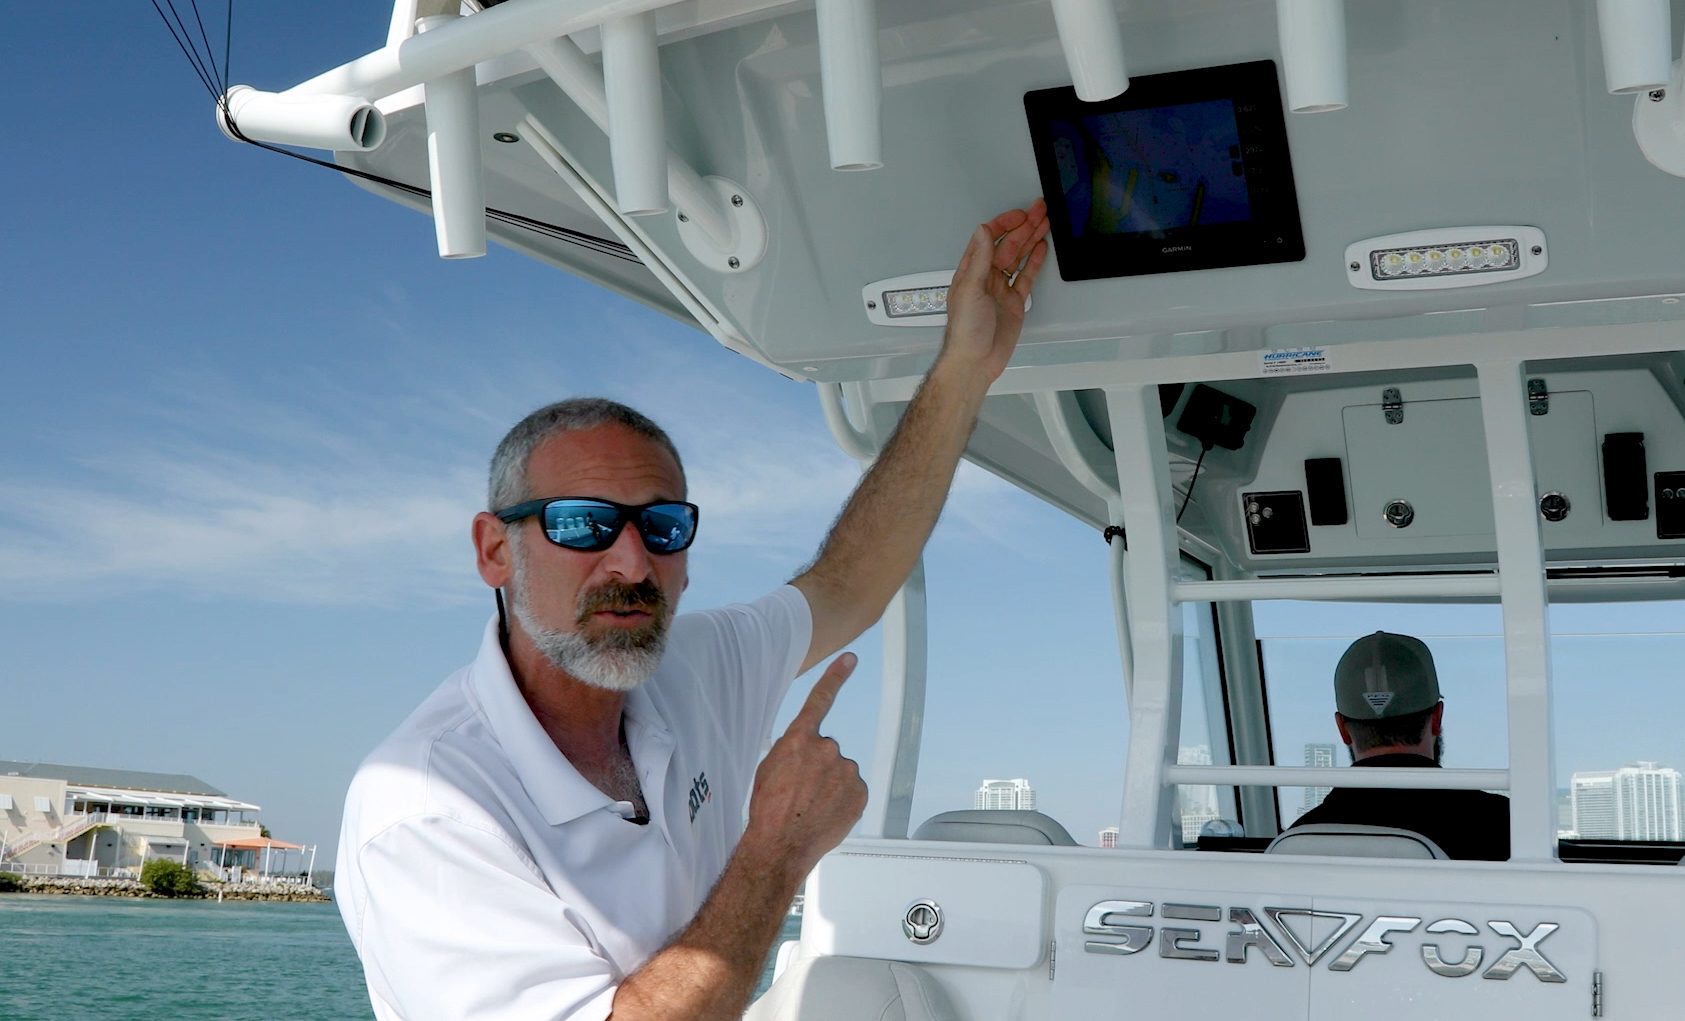 Best Multifunction Displays MFD for boats in 2020